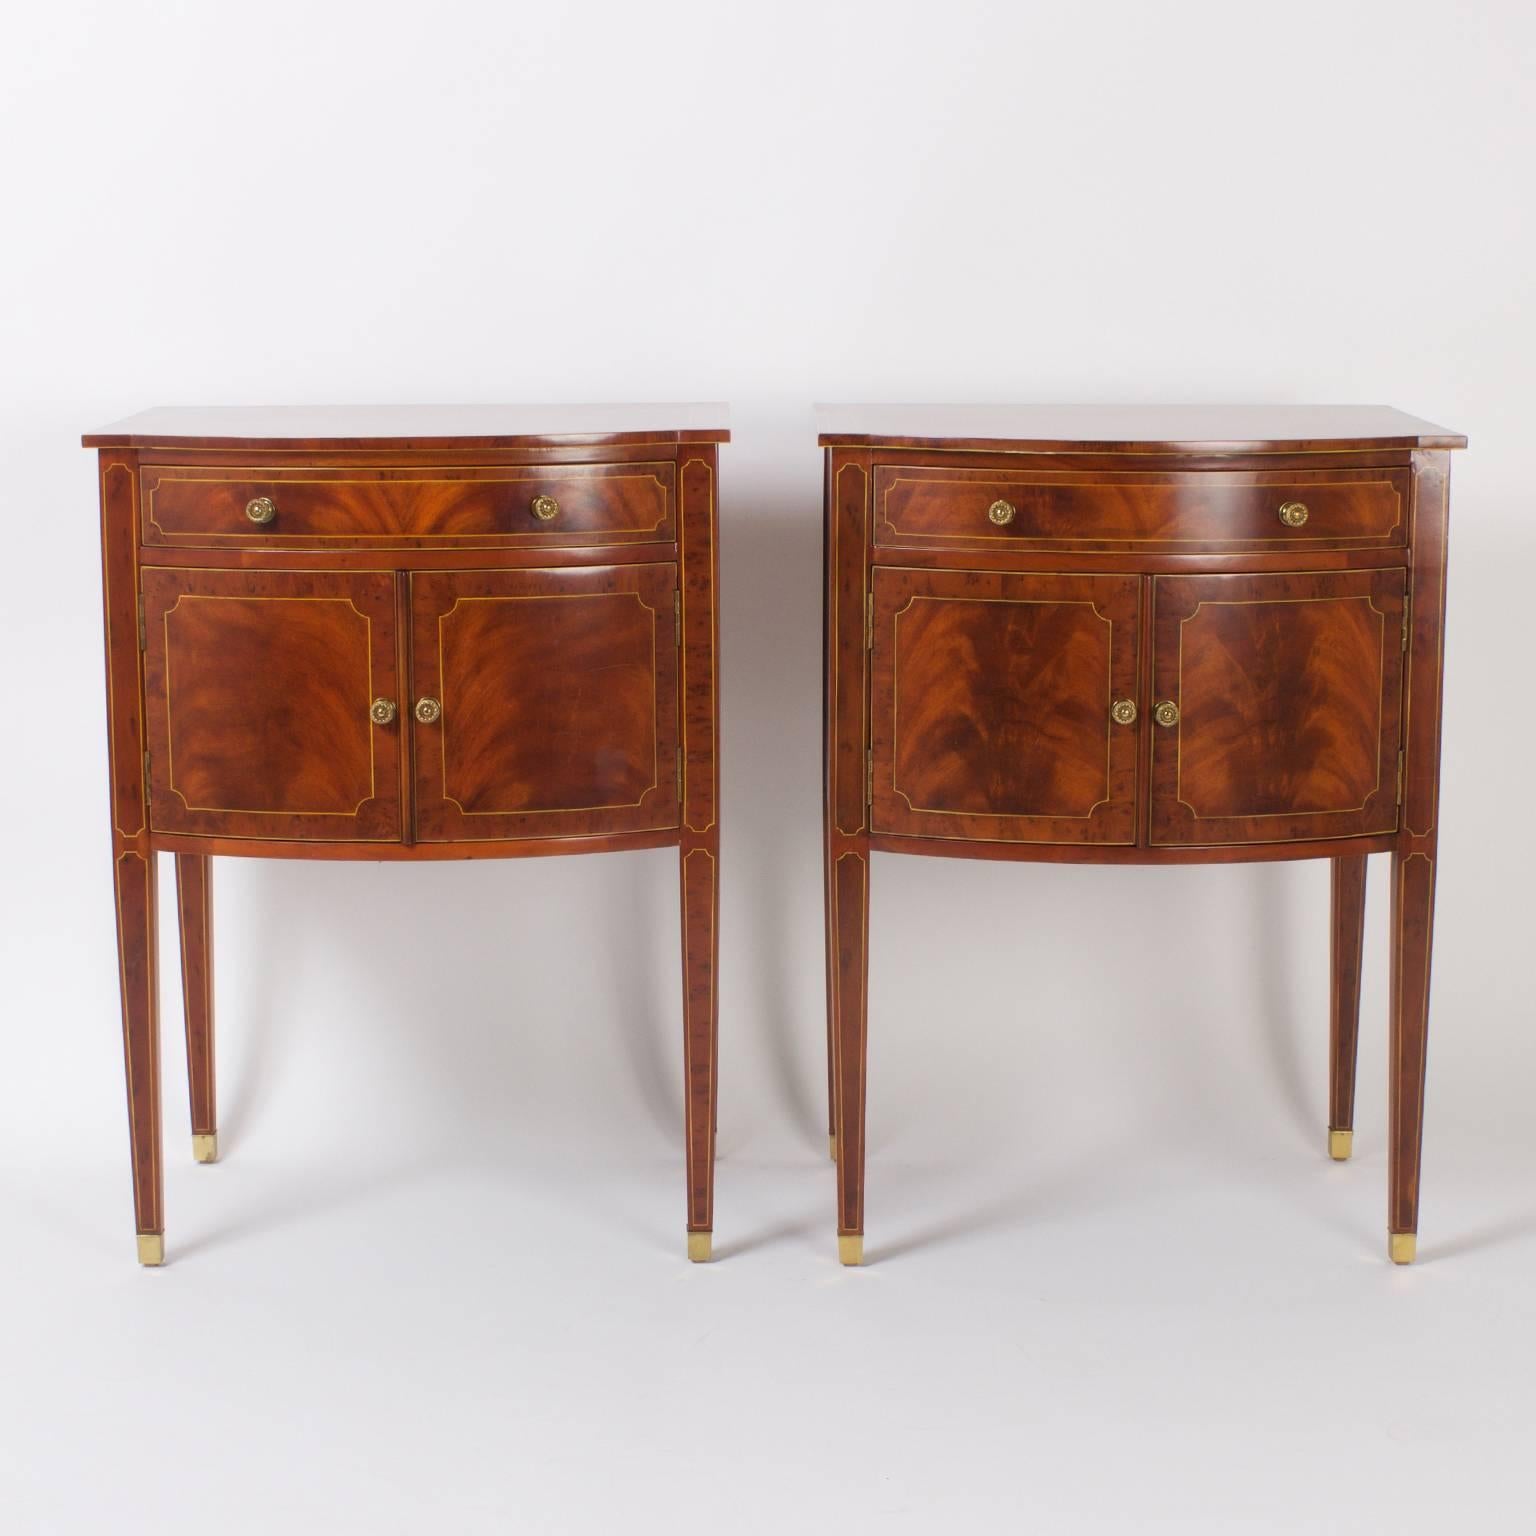 Elegant pair of bow front mahogany nightstands or cabinets featuring exotic flame mahogany veneers and satinwood string inlays that highlight the Classic form. Signed Maitland-Smith on a brass plaque.
                